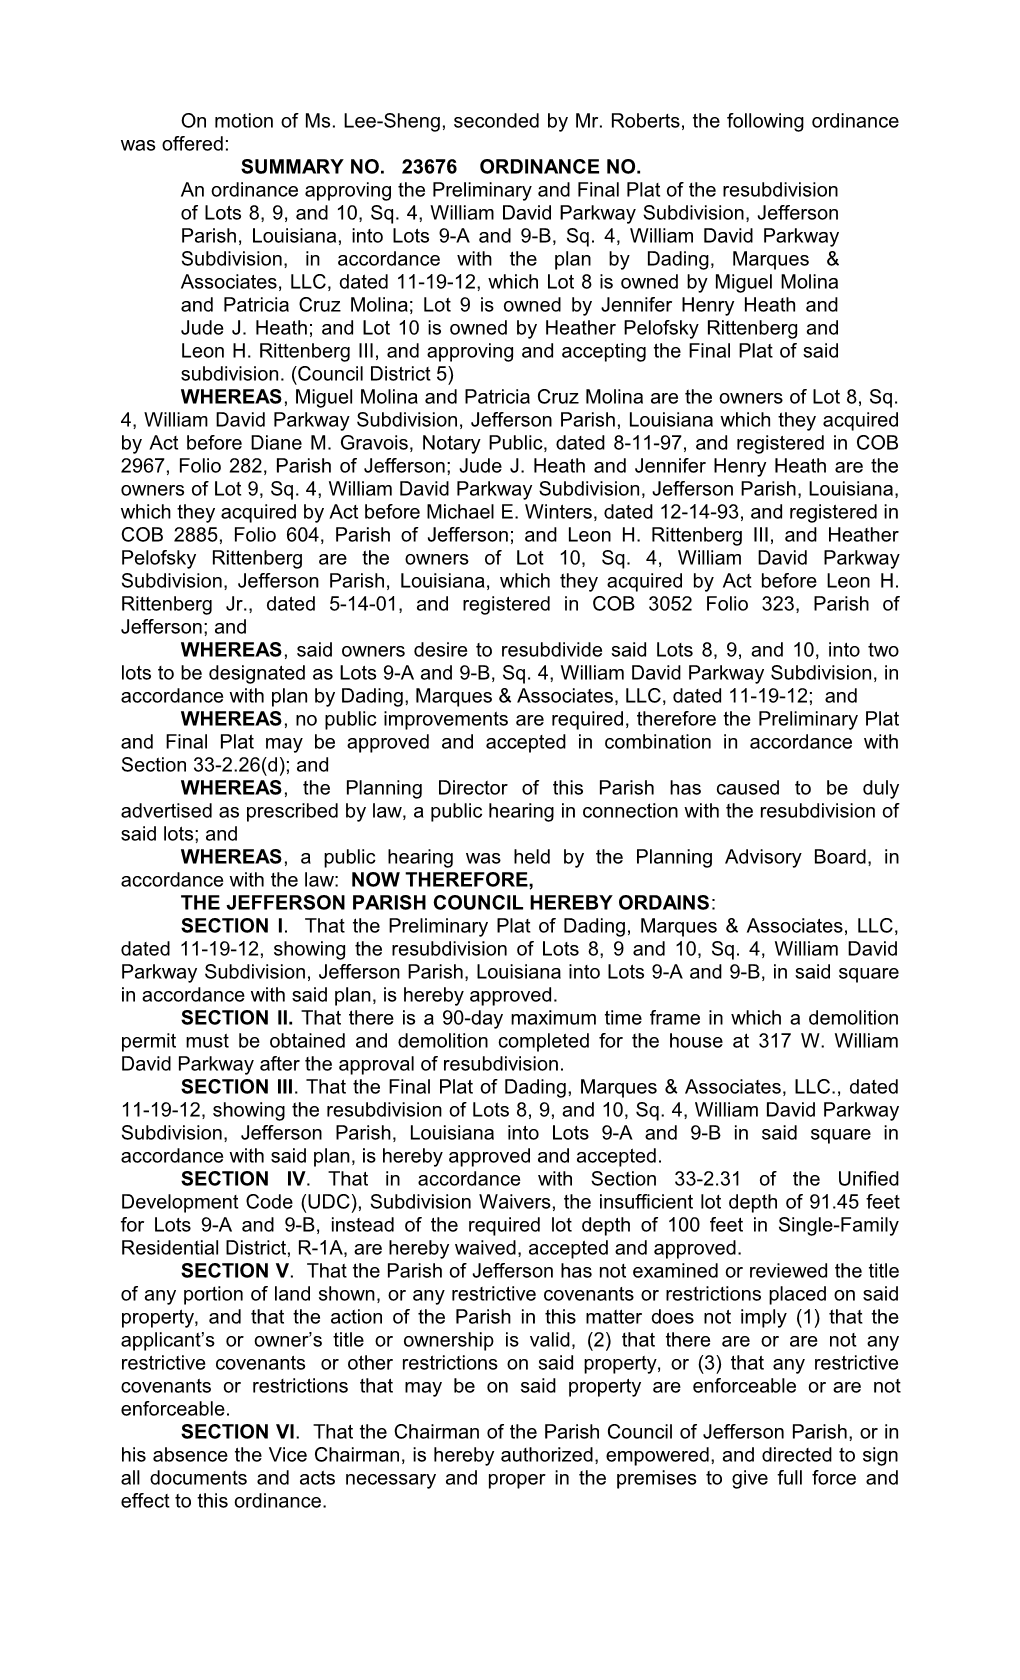 On Motion of Ms. Lee-Sheng, Seconded by Mr. Roberts, the Following Ordinance Was Offered